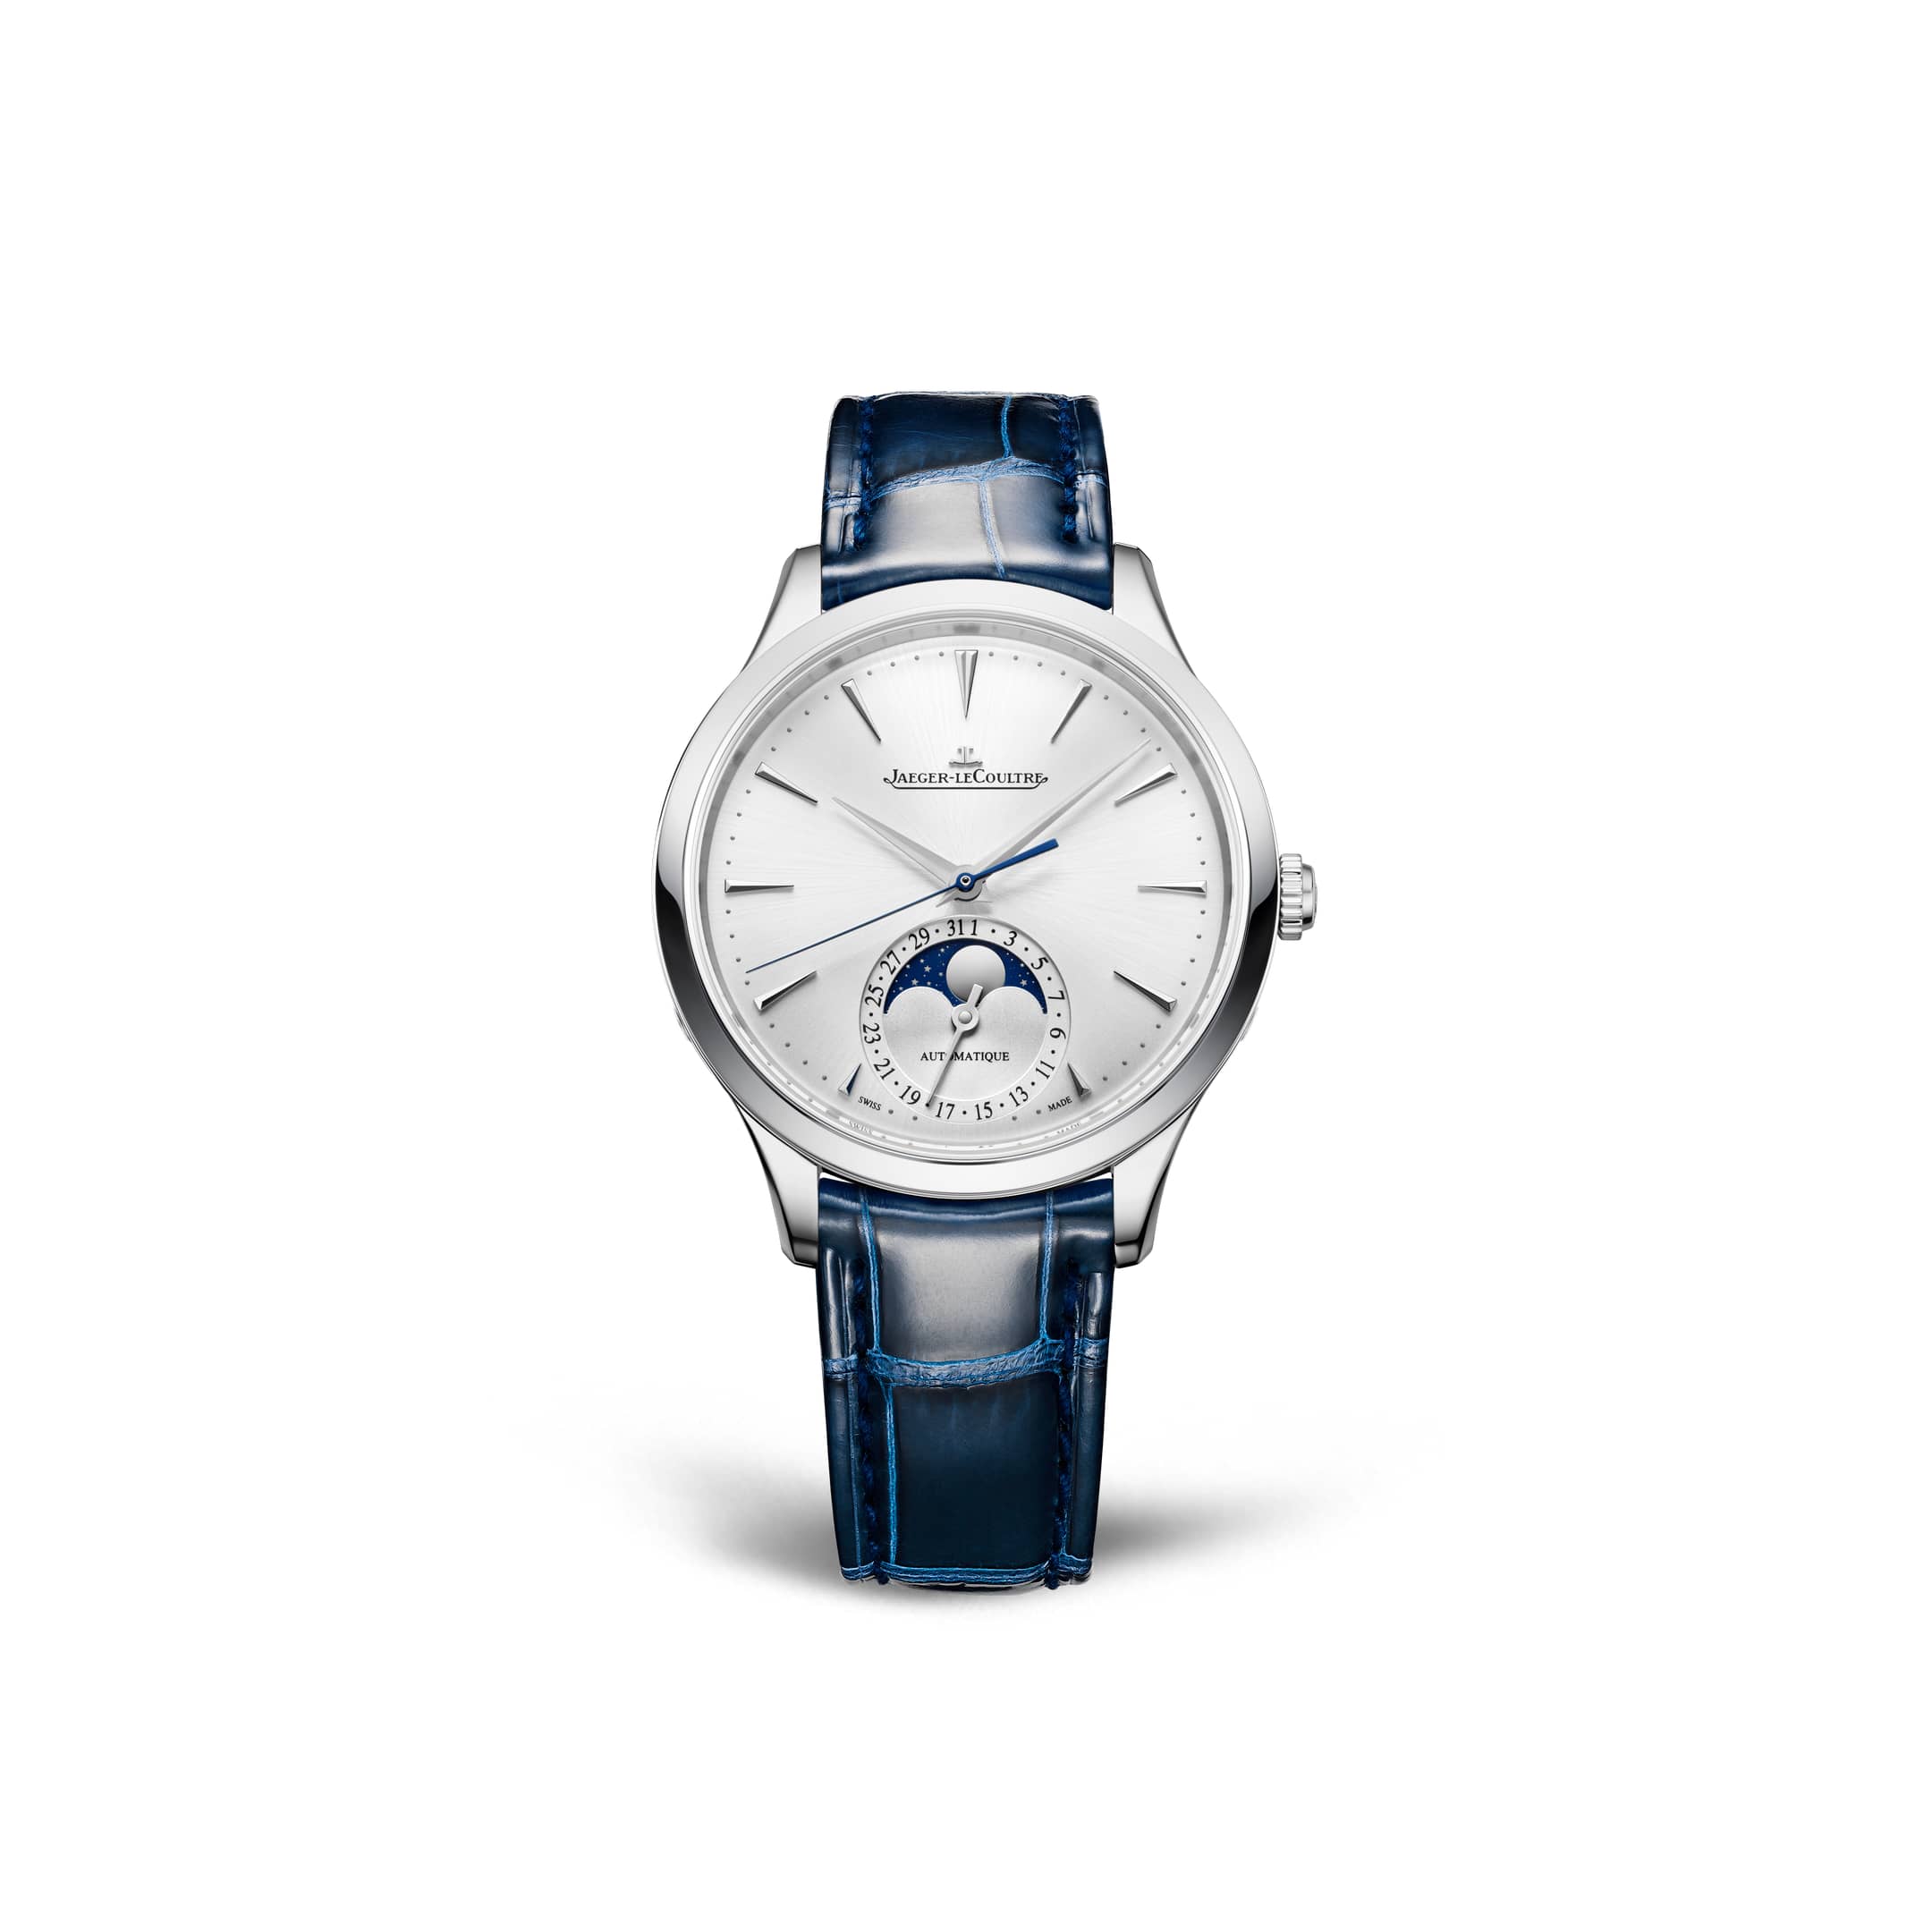 Jaeger LeCoultre watches - Shop Online | Watches World